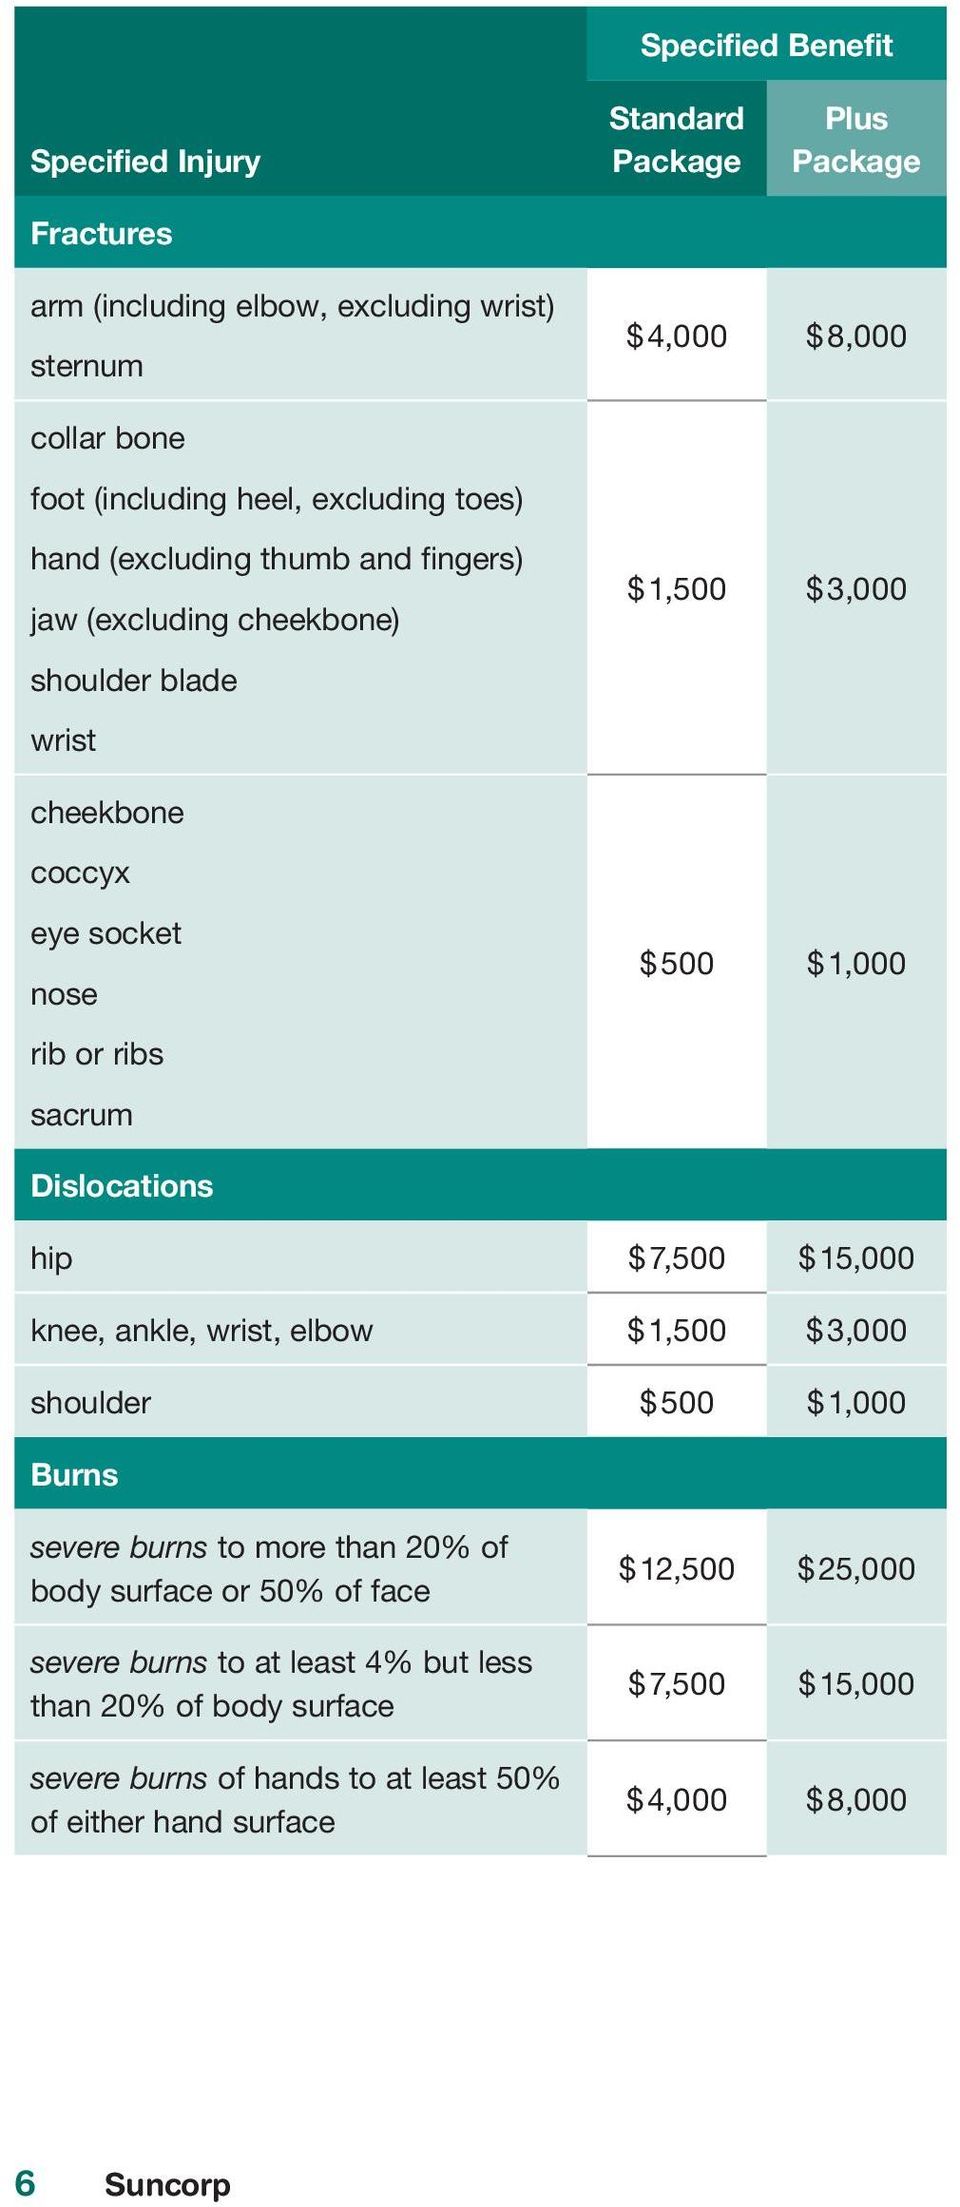 $1,000 $ Dislocations hip $7,500 $ $15,000 $ knee, ankle, wrist, elbow $1,500 $ $3,000 $ shoulder $500 $ $1,000 $ Burns severe burns to more than 20% of body surface or 50% of